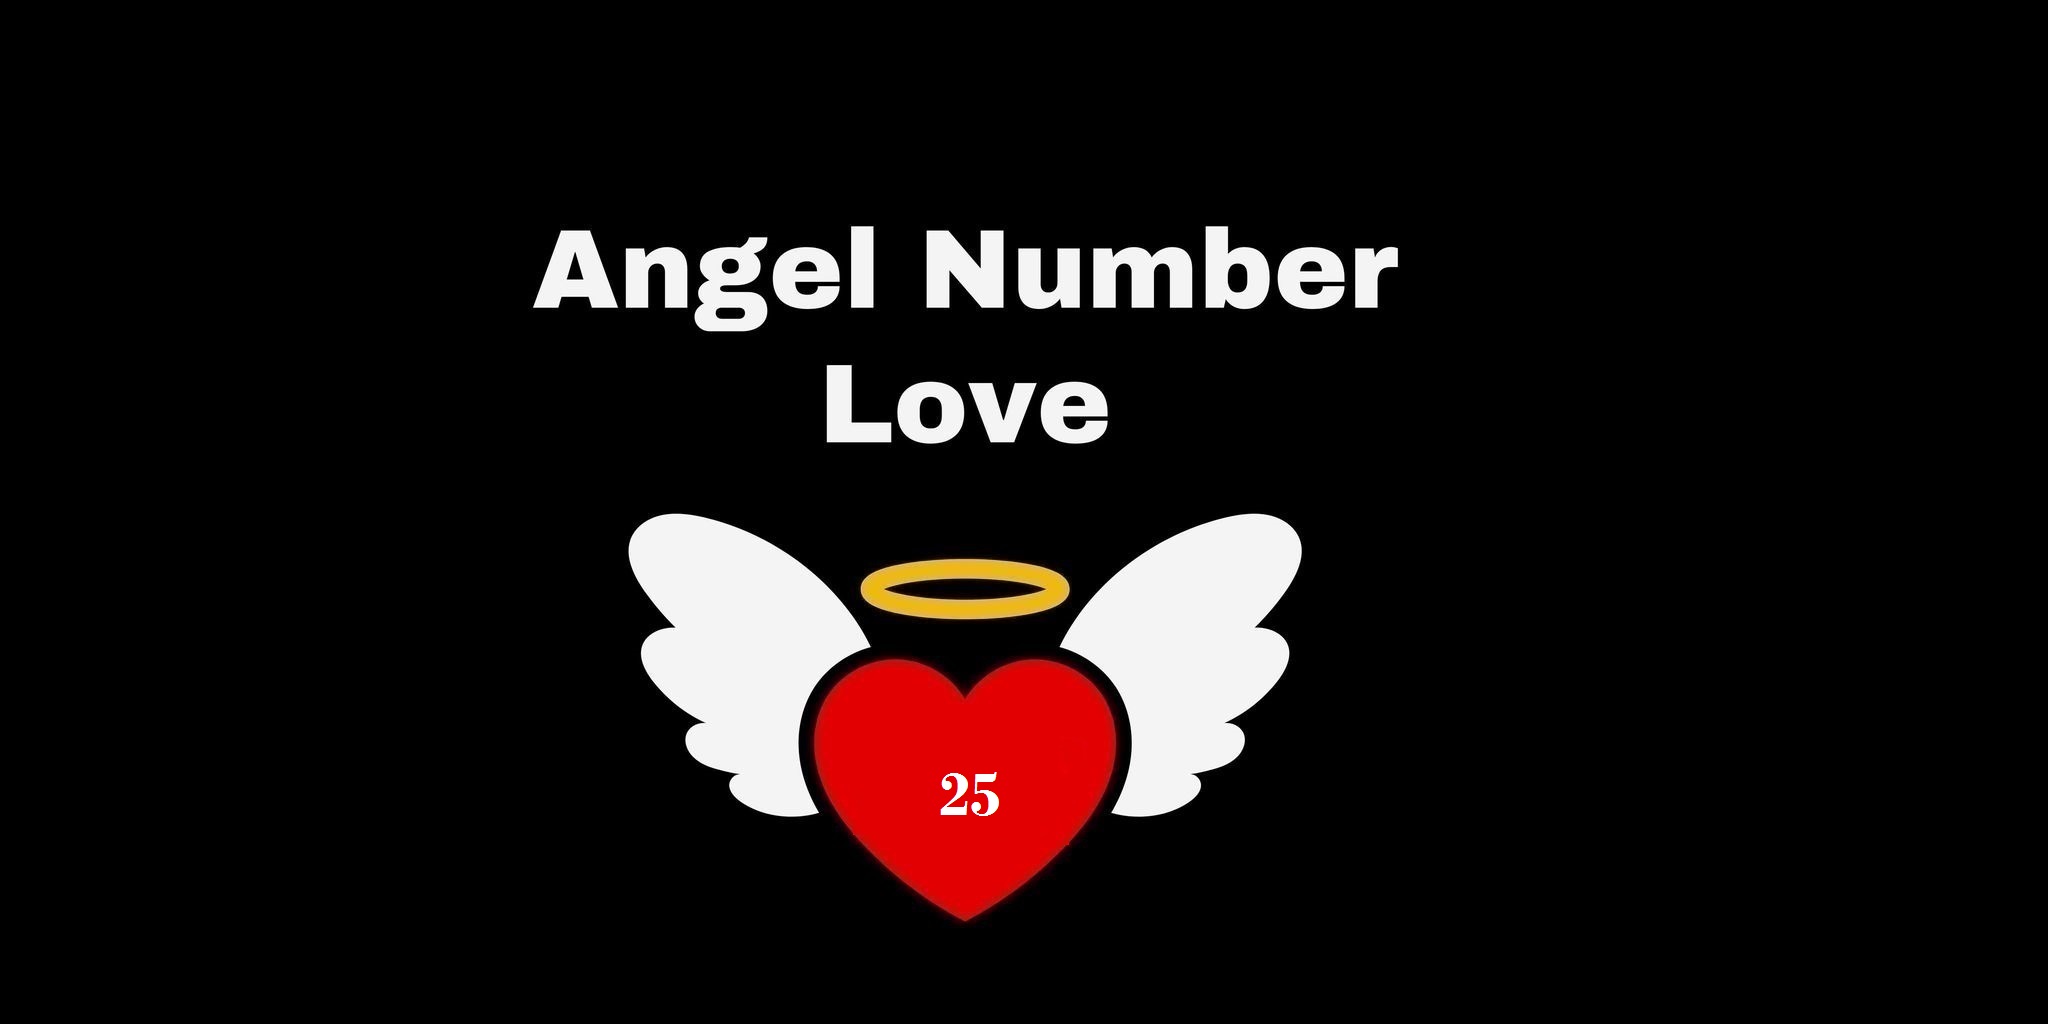 25 Angel Number Meaning In Love